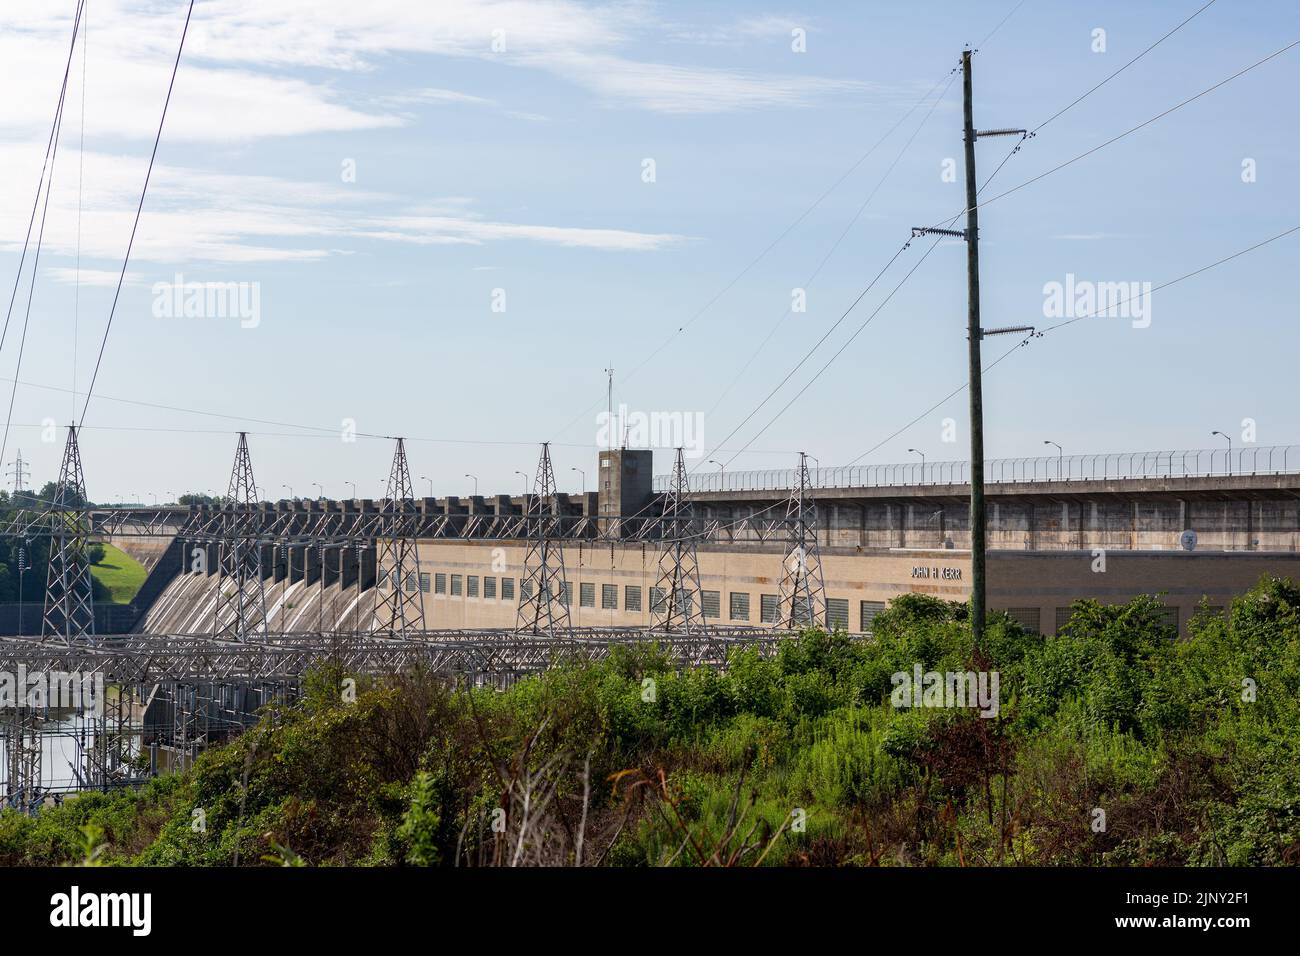 John H Kerr dam near Boydton Mecklenburg County, in Virginia US. Hydro electric power station but not generating so a quiet peaceful shot. Stock Photo